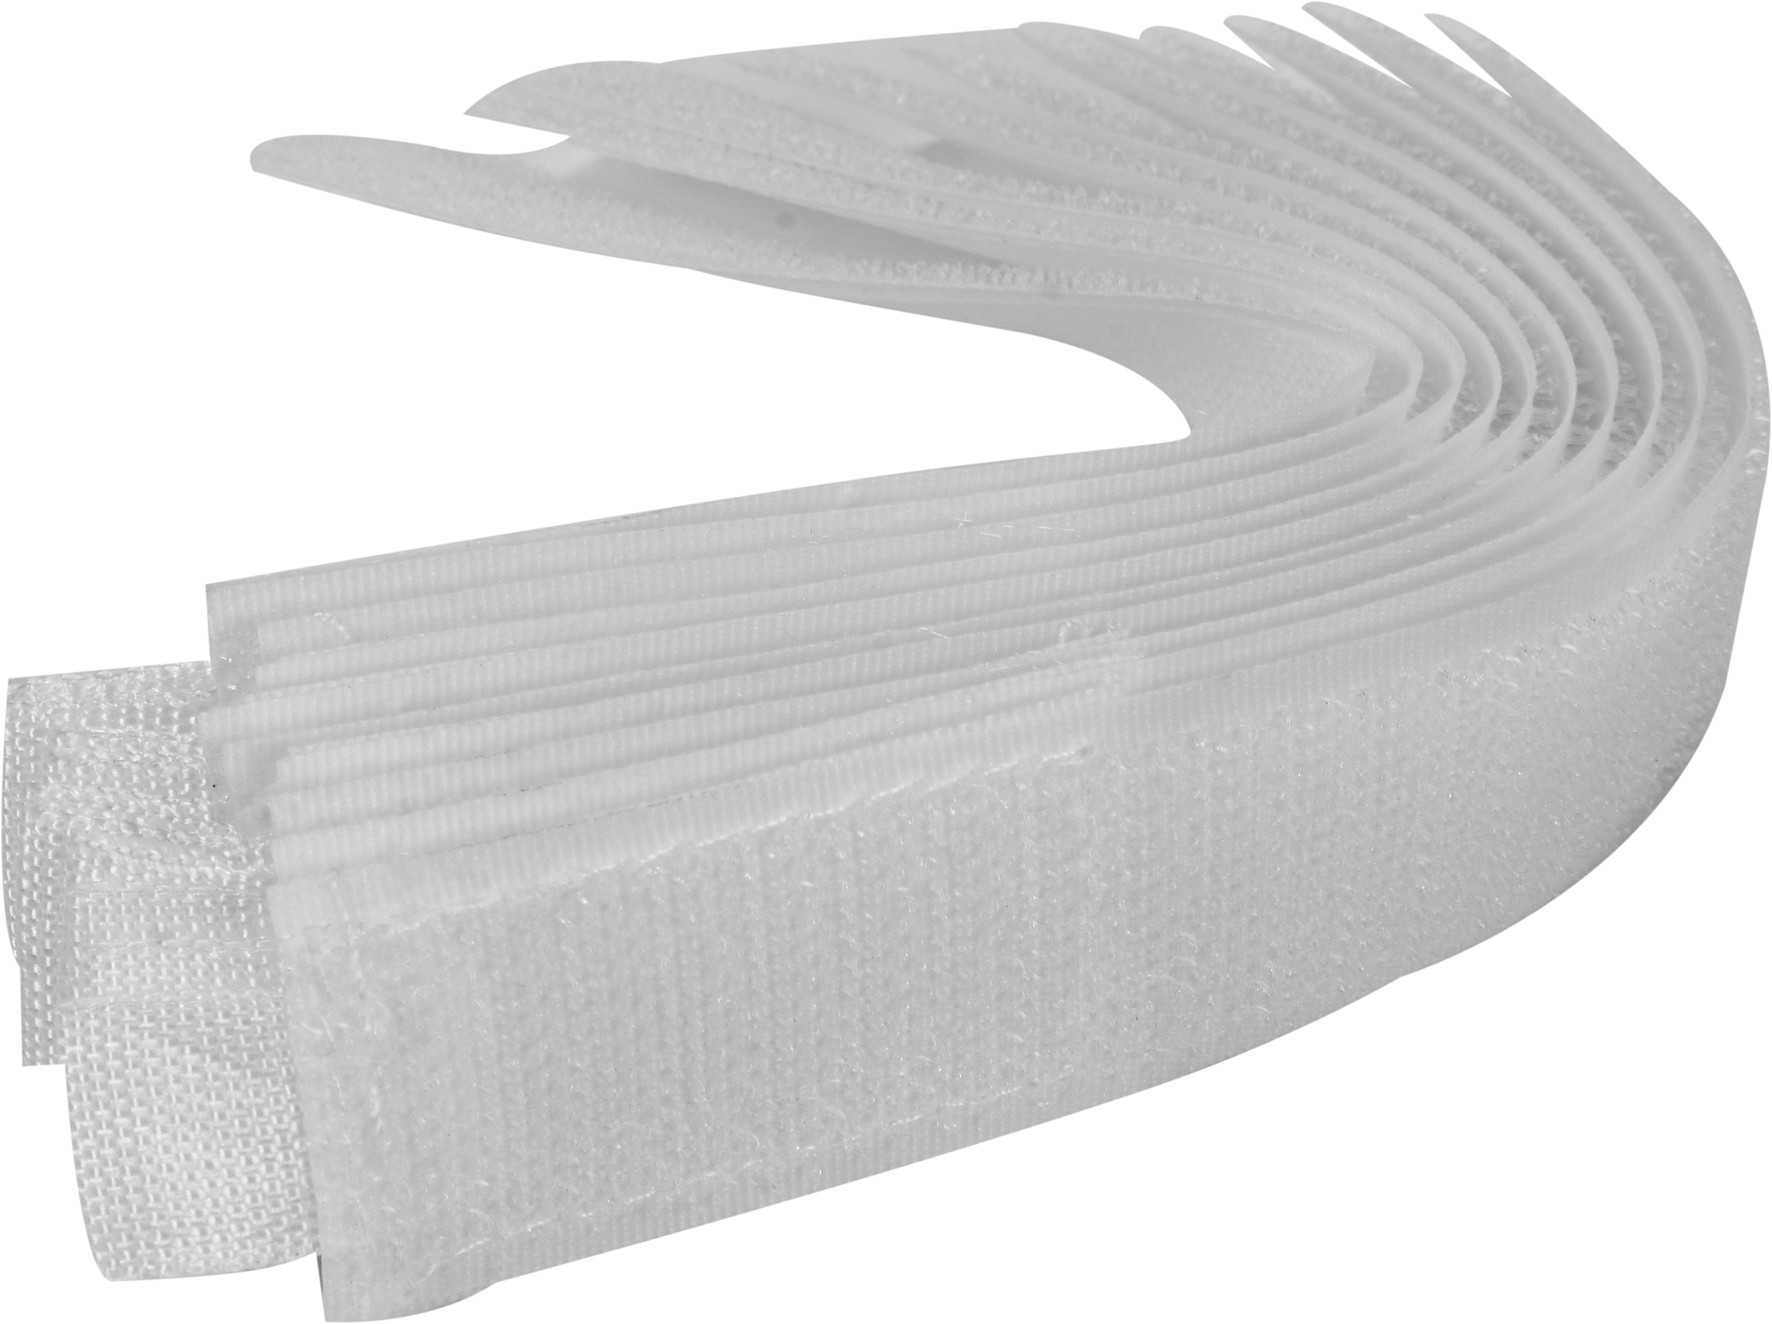 VELCRO CABLE TIES 10PCS